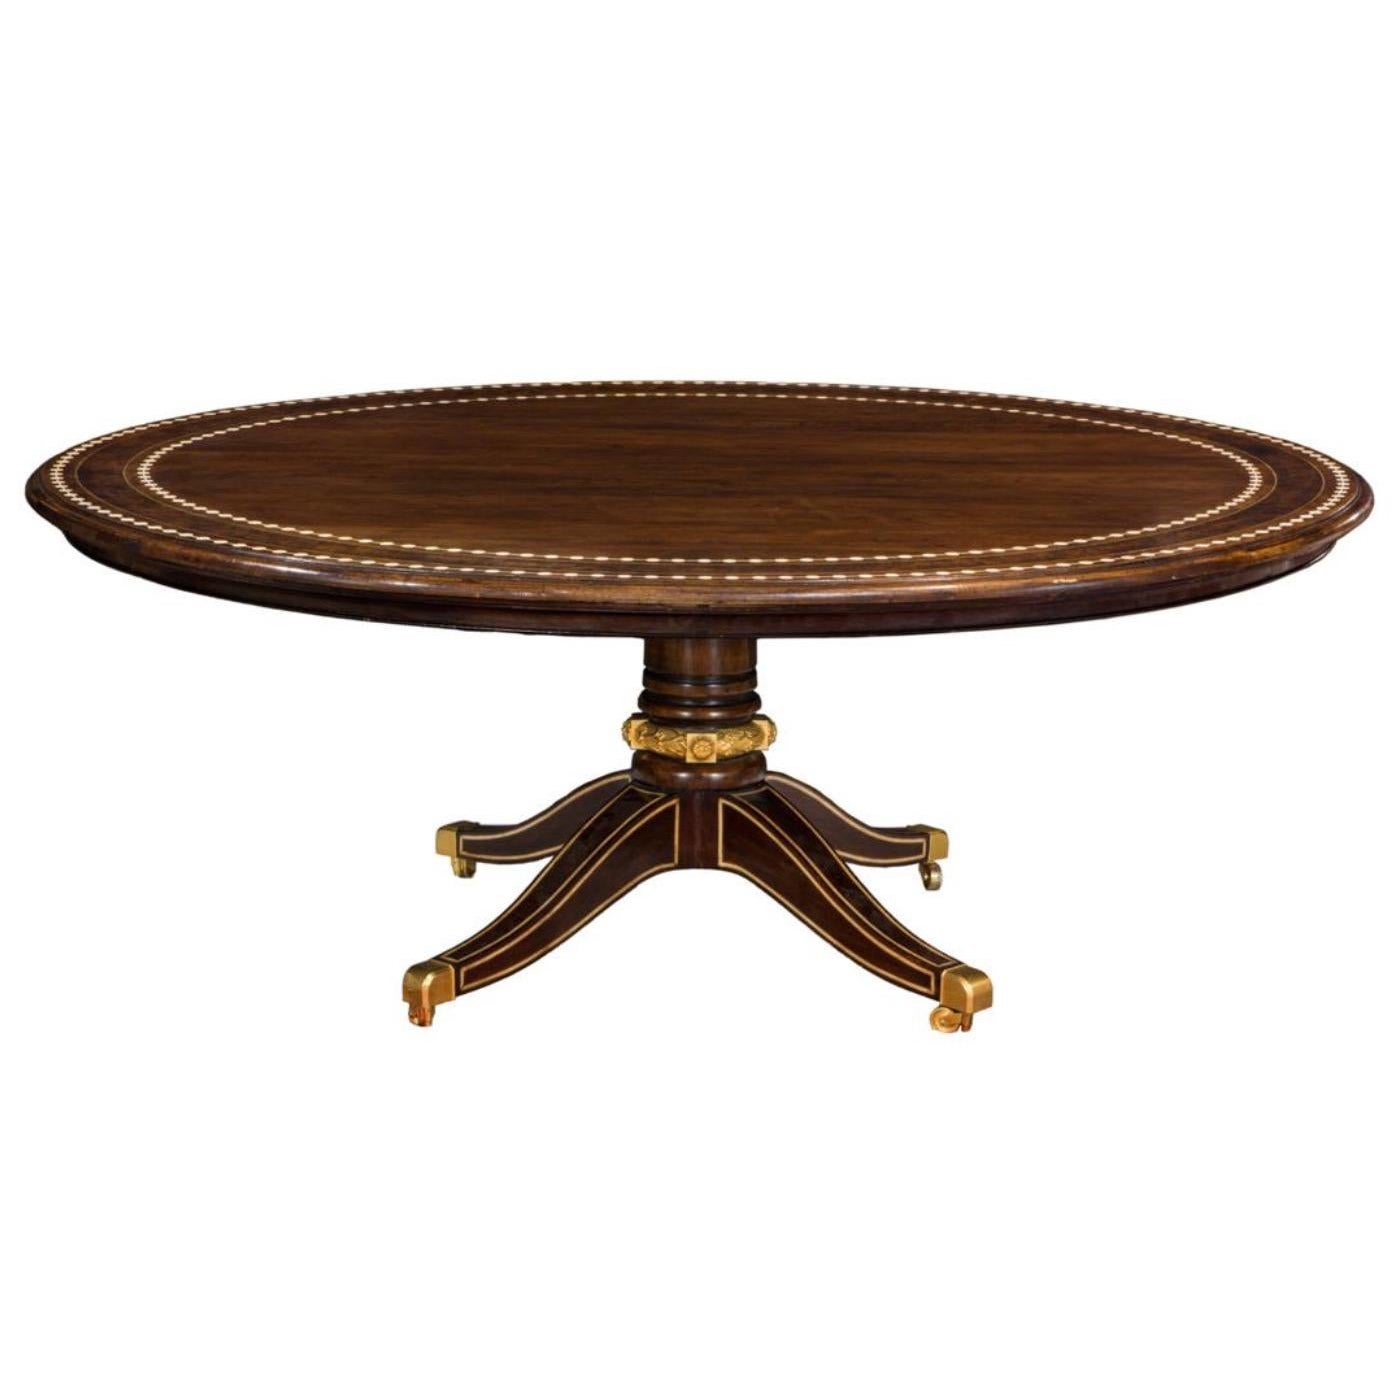 Walnut & Oak Dining Table with Inlays, gilded bronze ring, after George Bullock For Sale